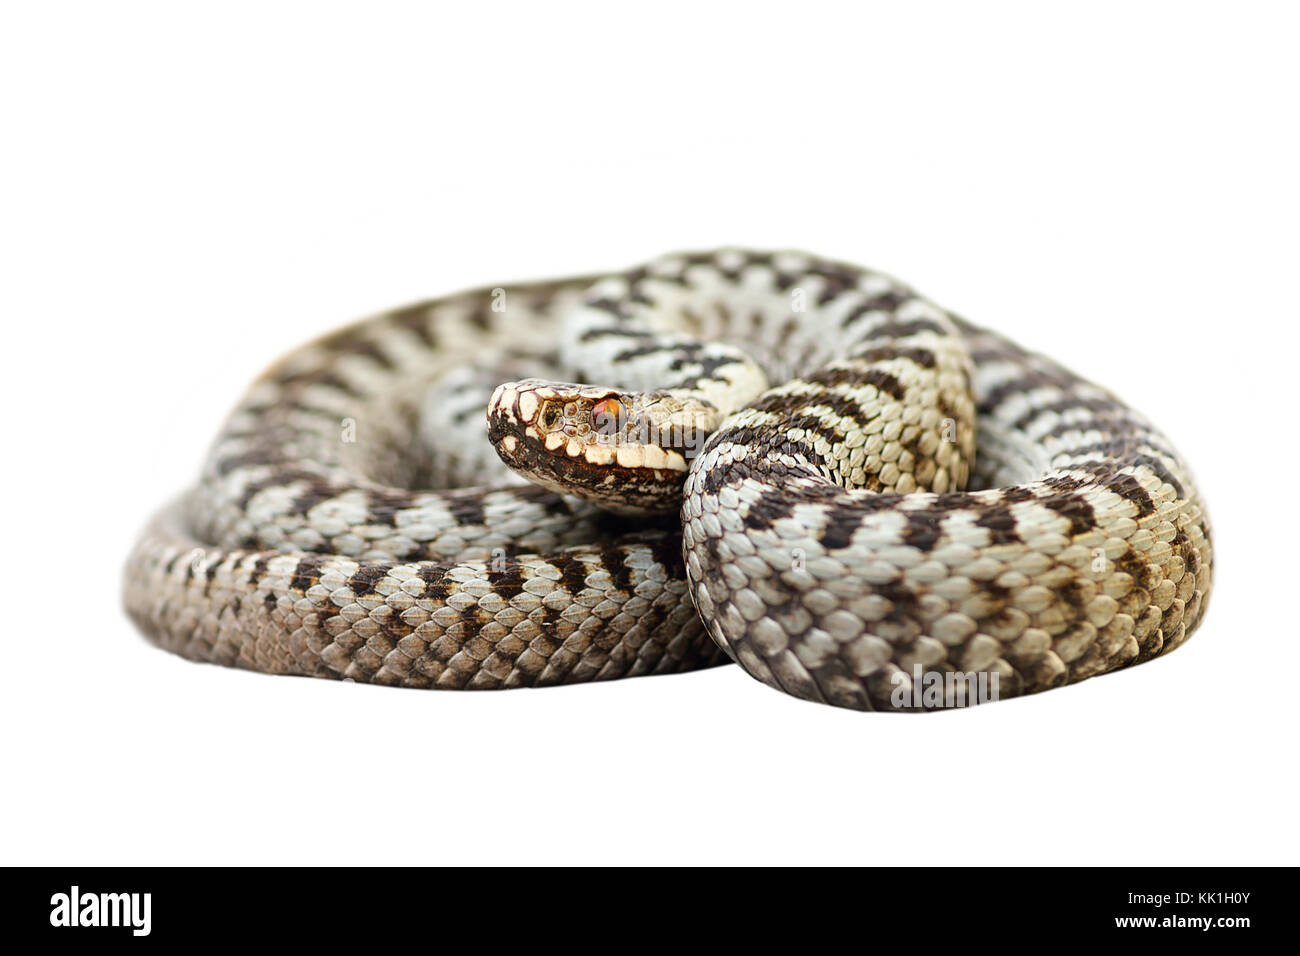 european venomous snake, the common crossed viper ( Vipera berus ); wild animal ( reptile, full length ) isolated over white background, ready for you Stock Photo